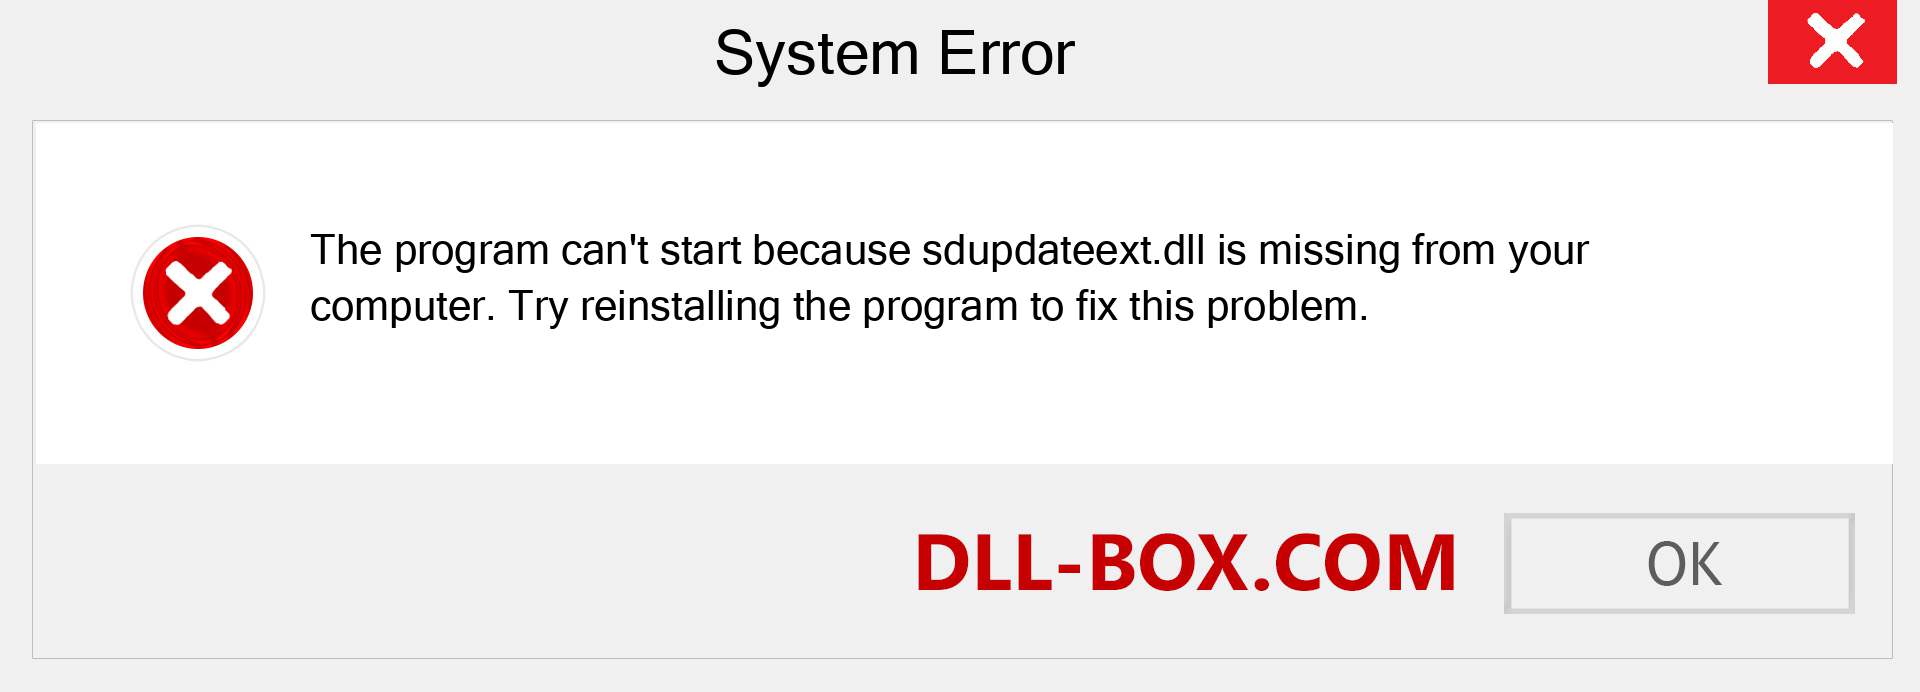  sdupdateext.dll file is missing?. Download for Windows 7, 8, 10 - Fix  sdupdateext dll Missing Error on Windows, photos, images